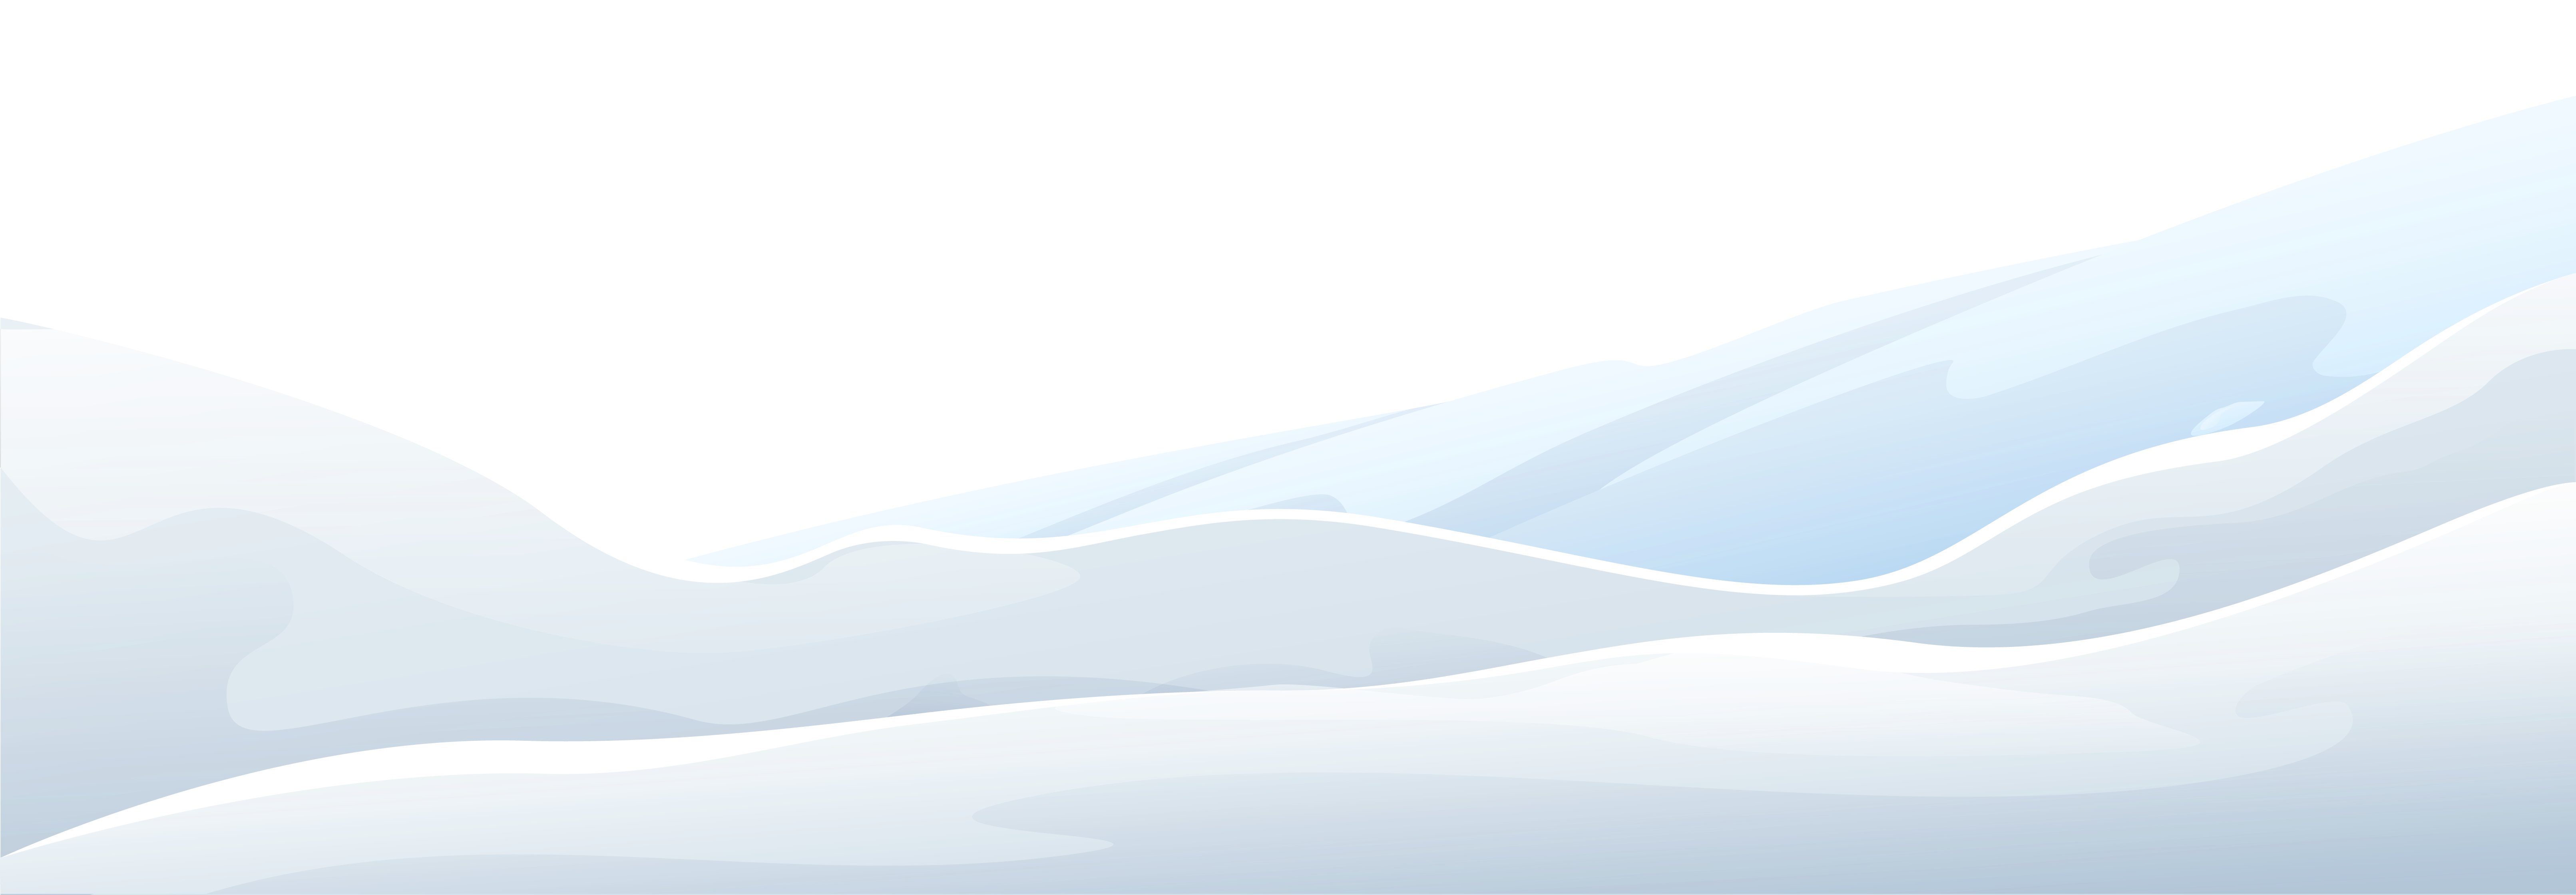 Snow winter png image. Clipart rock ground